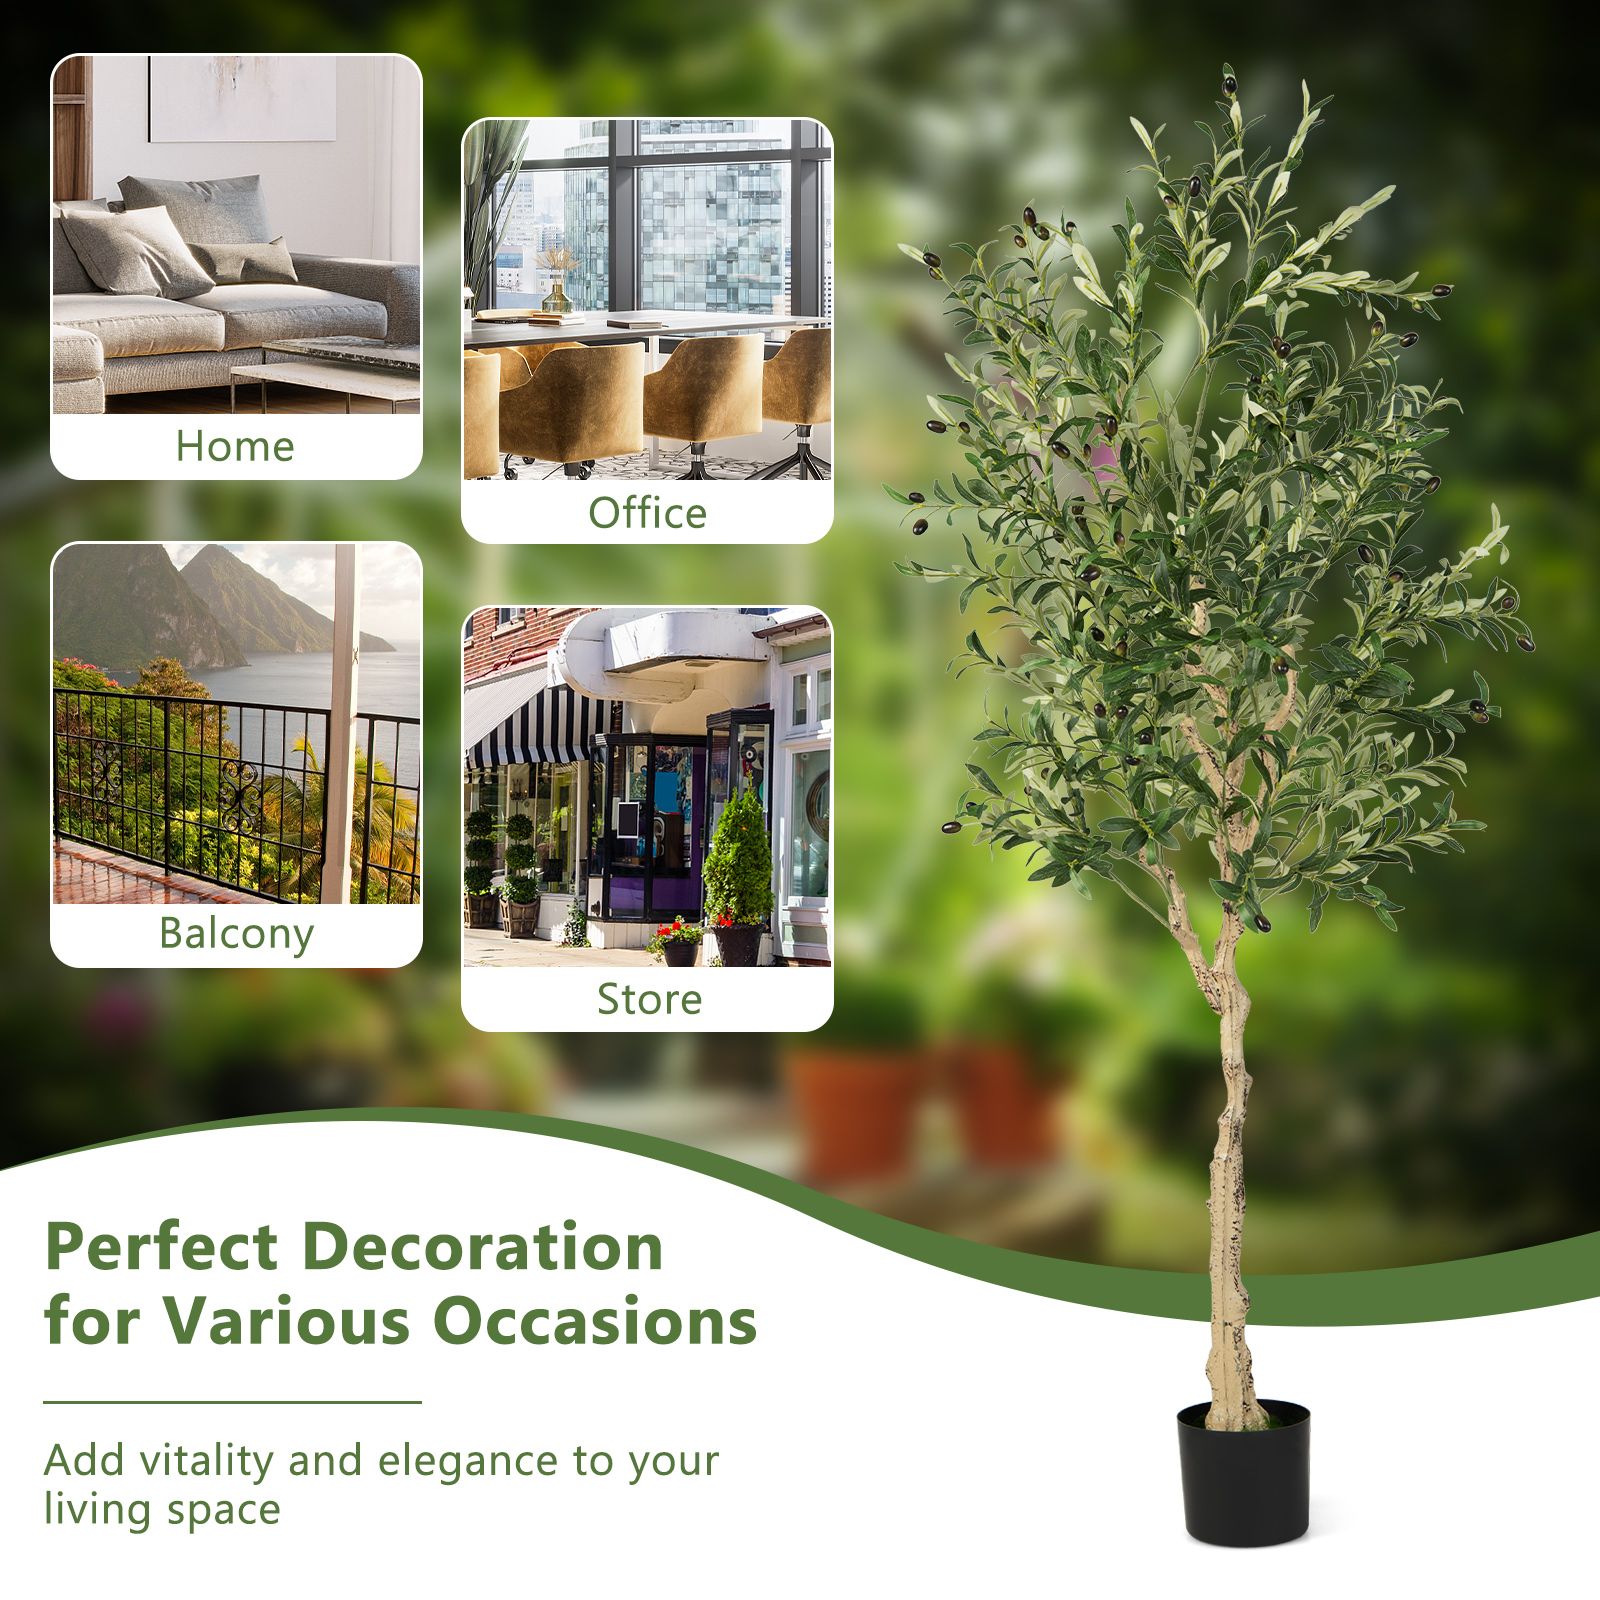 2-Pack 182cm Artificial Olive Trees with 72 Fruits